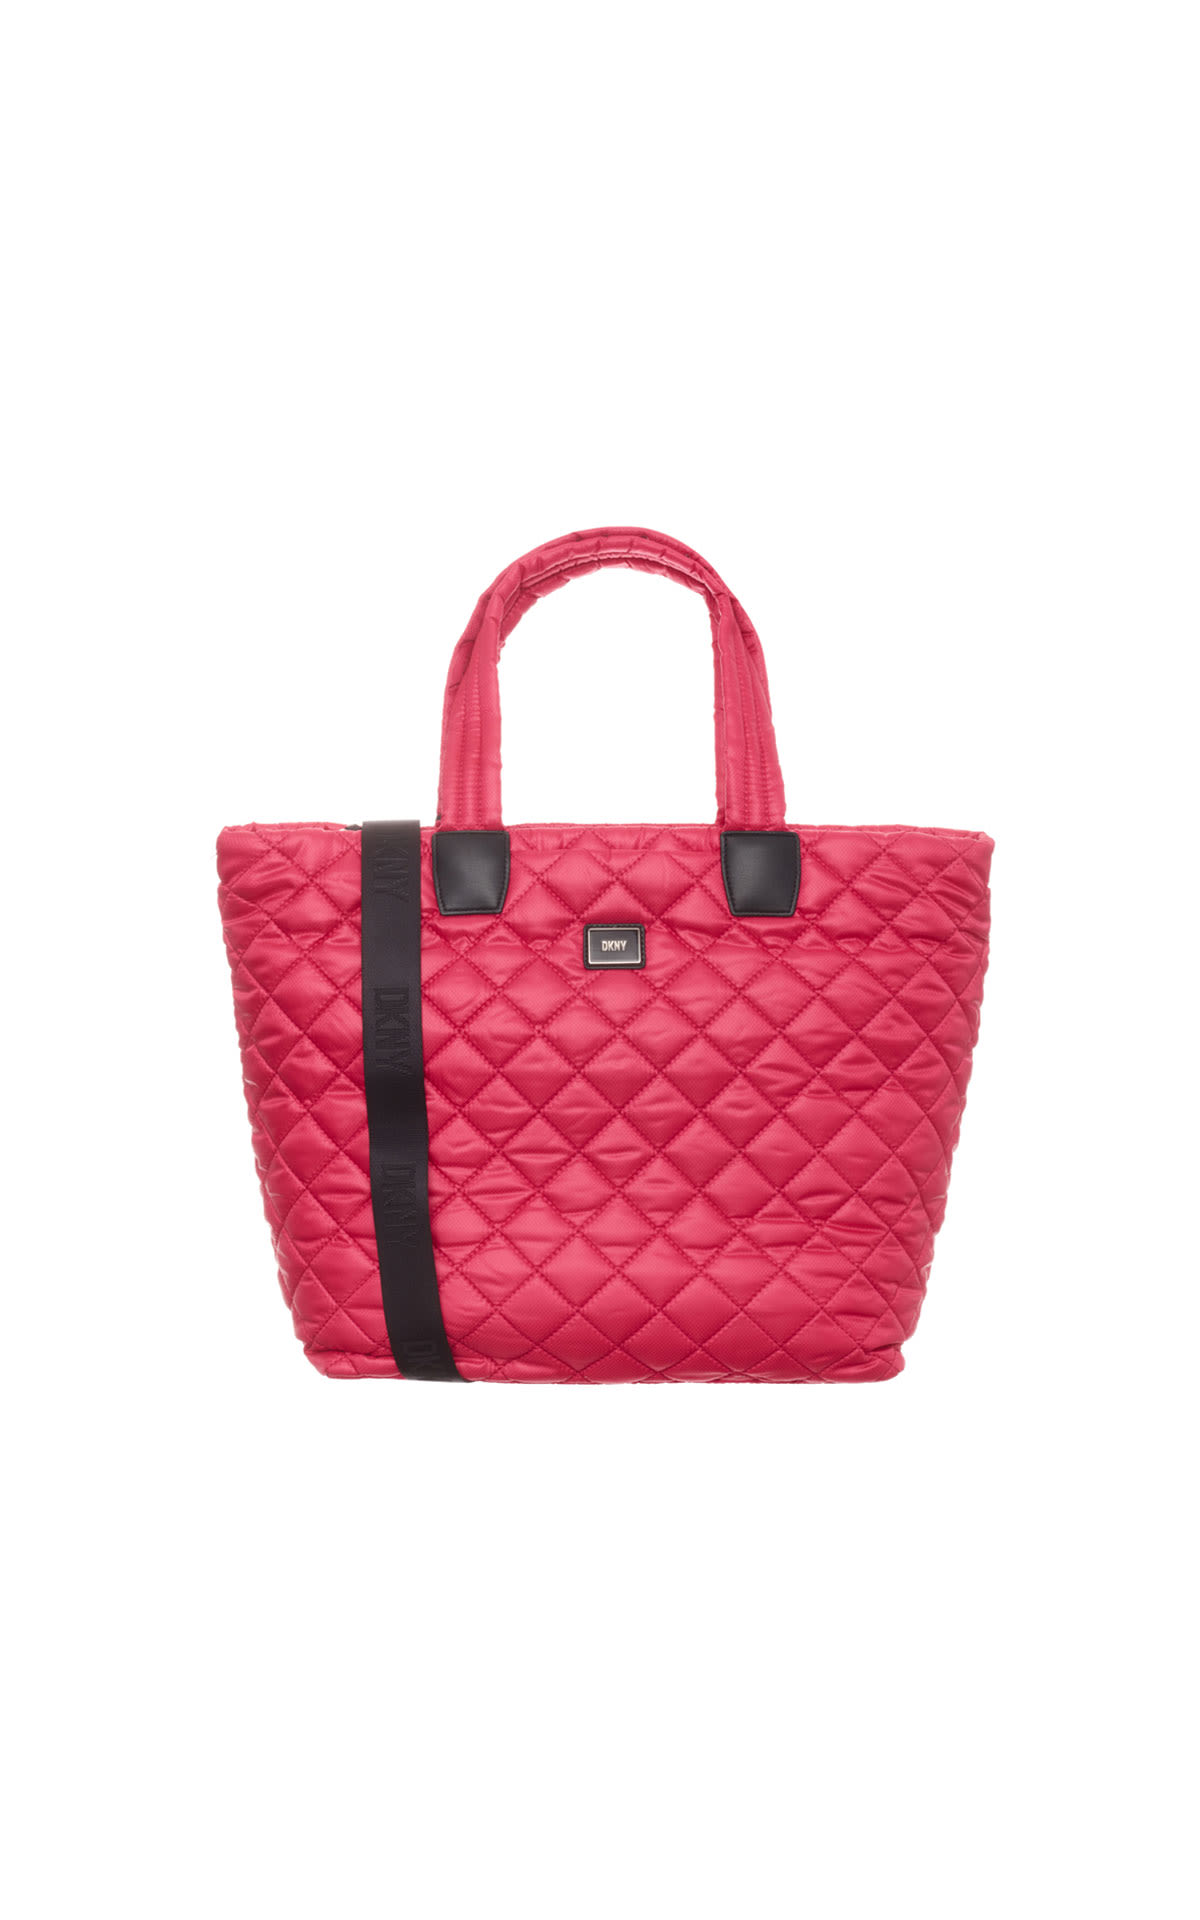 DKNY Maya tote from Bicester Village